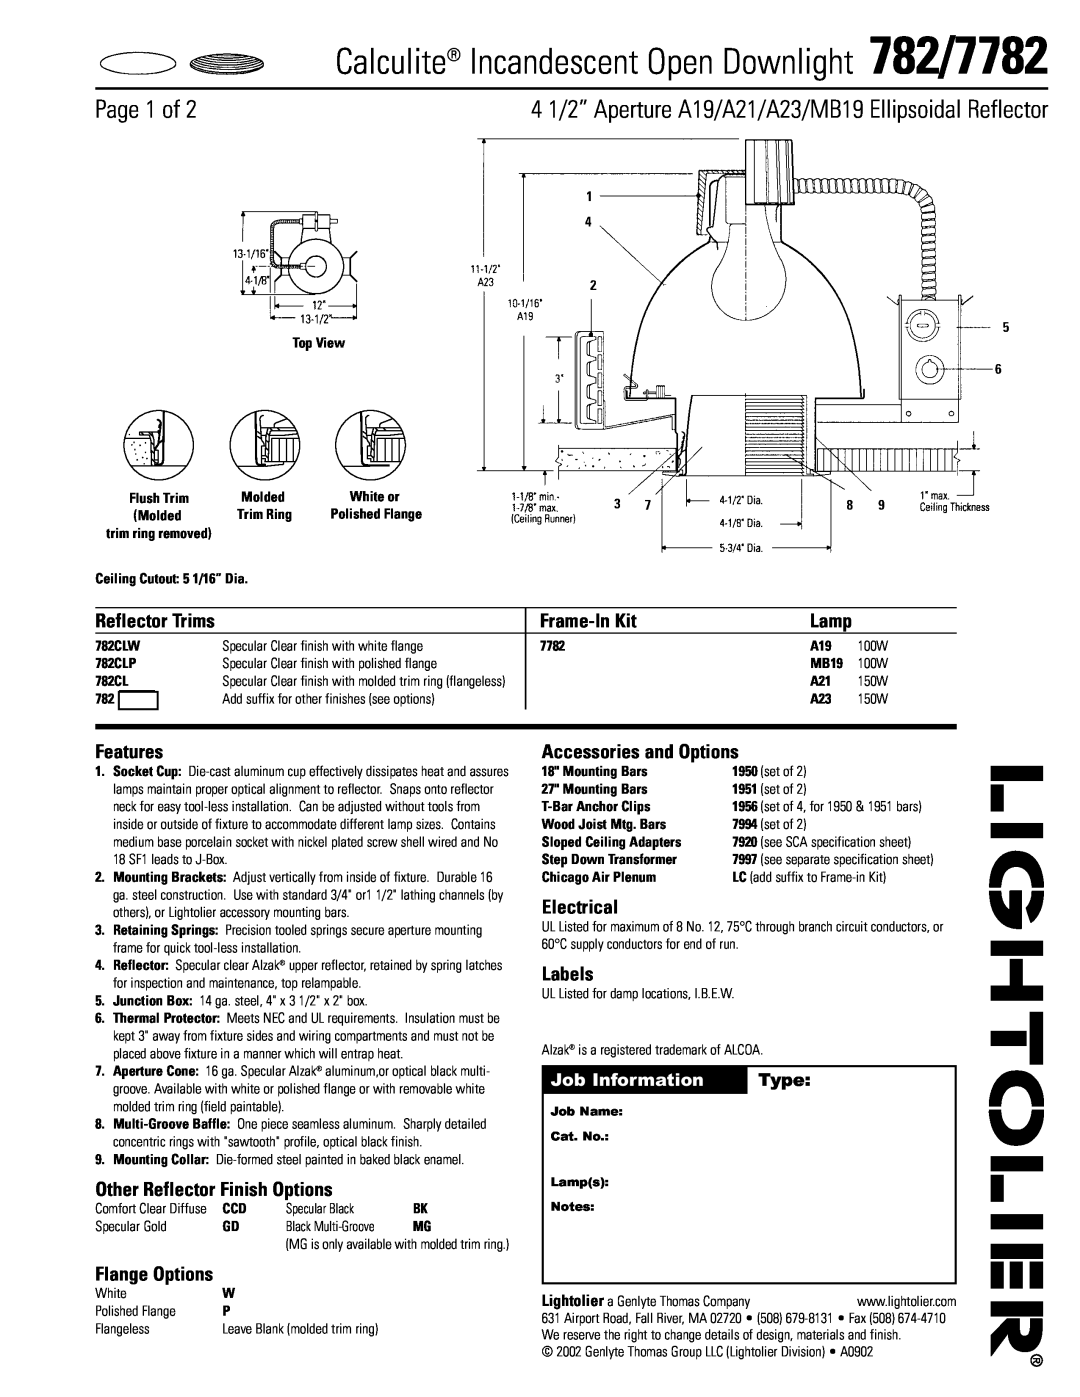 Lightolier specifications Calculite Incandescent Open Downlight 782/7782, Page 1 of, Job Information, Type, Frame-InKit 